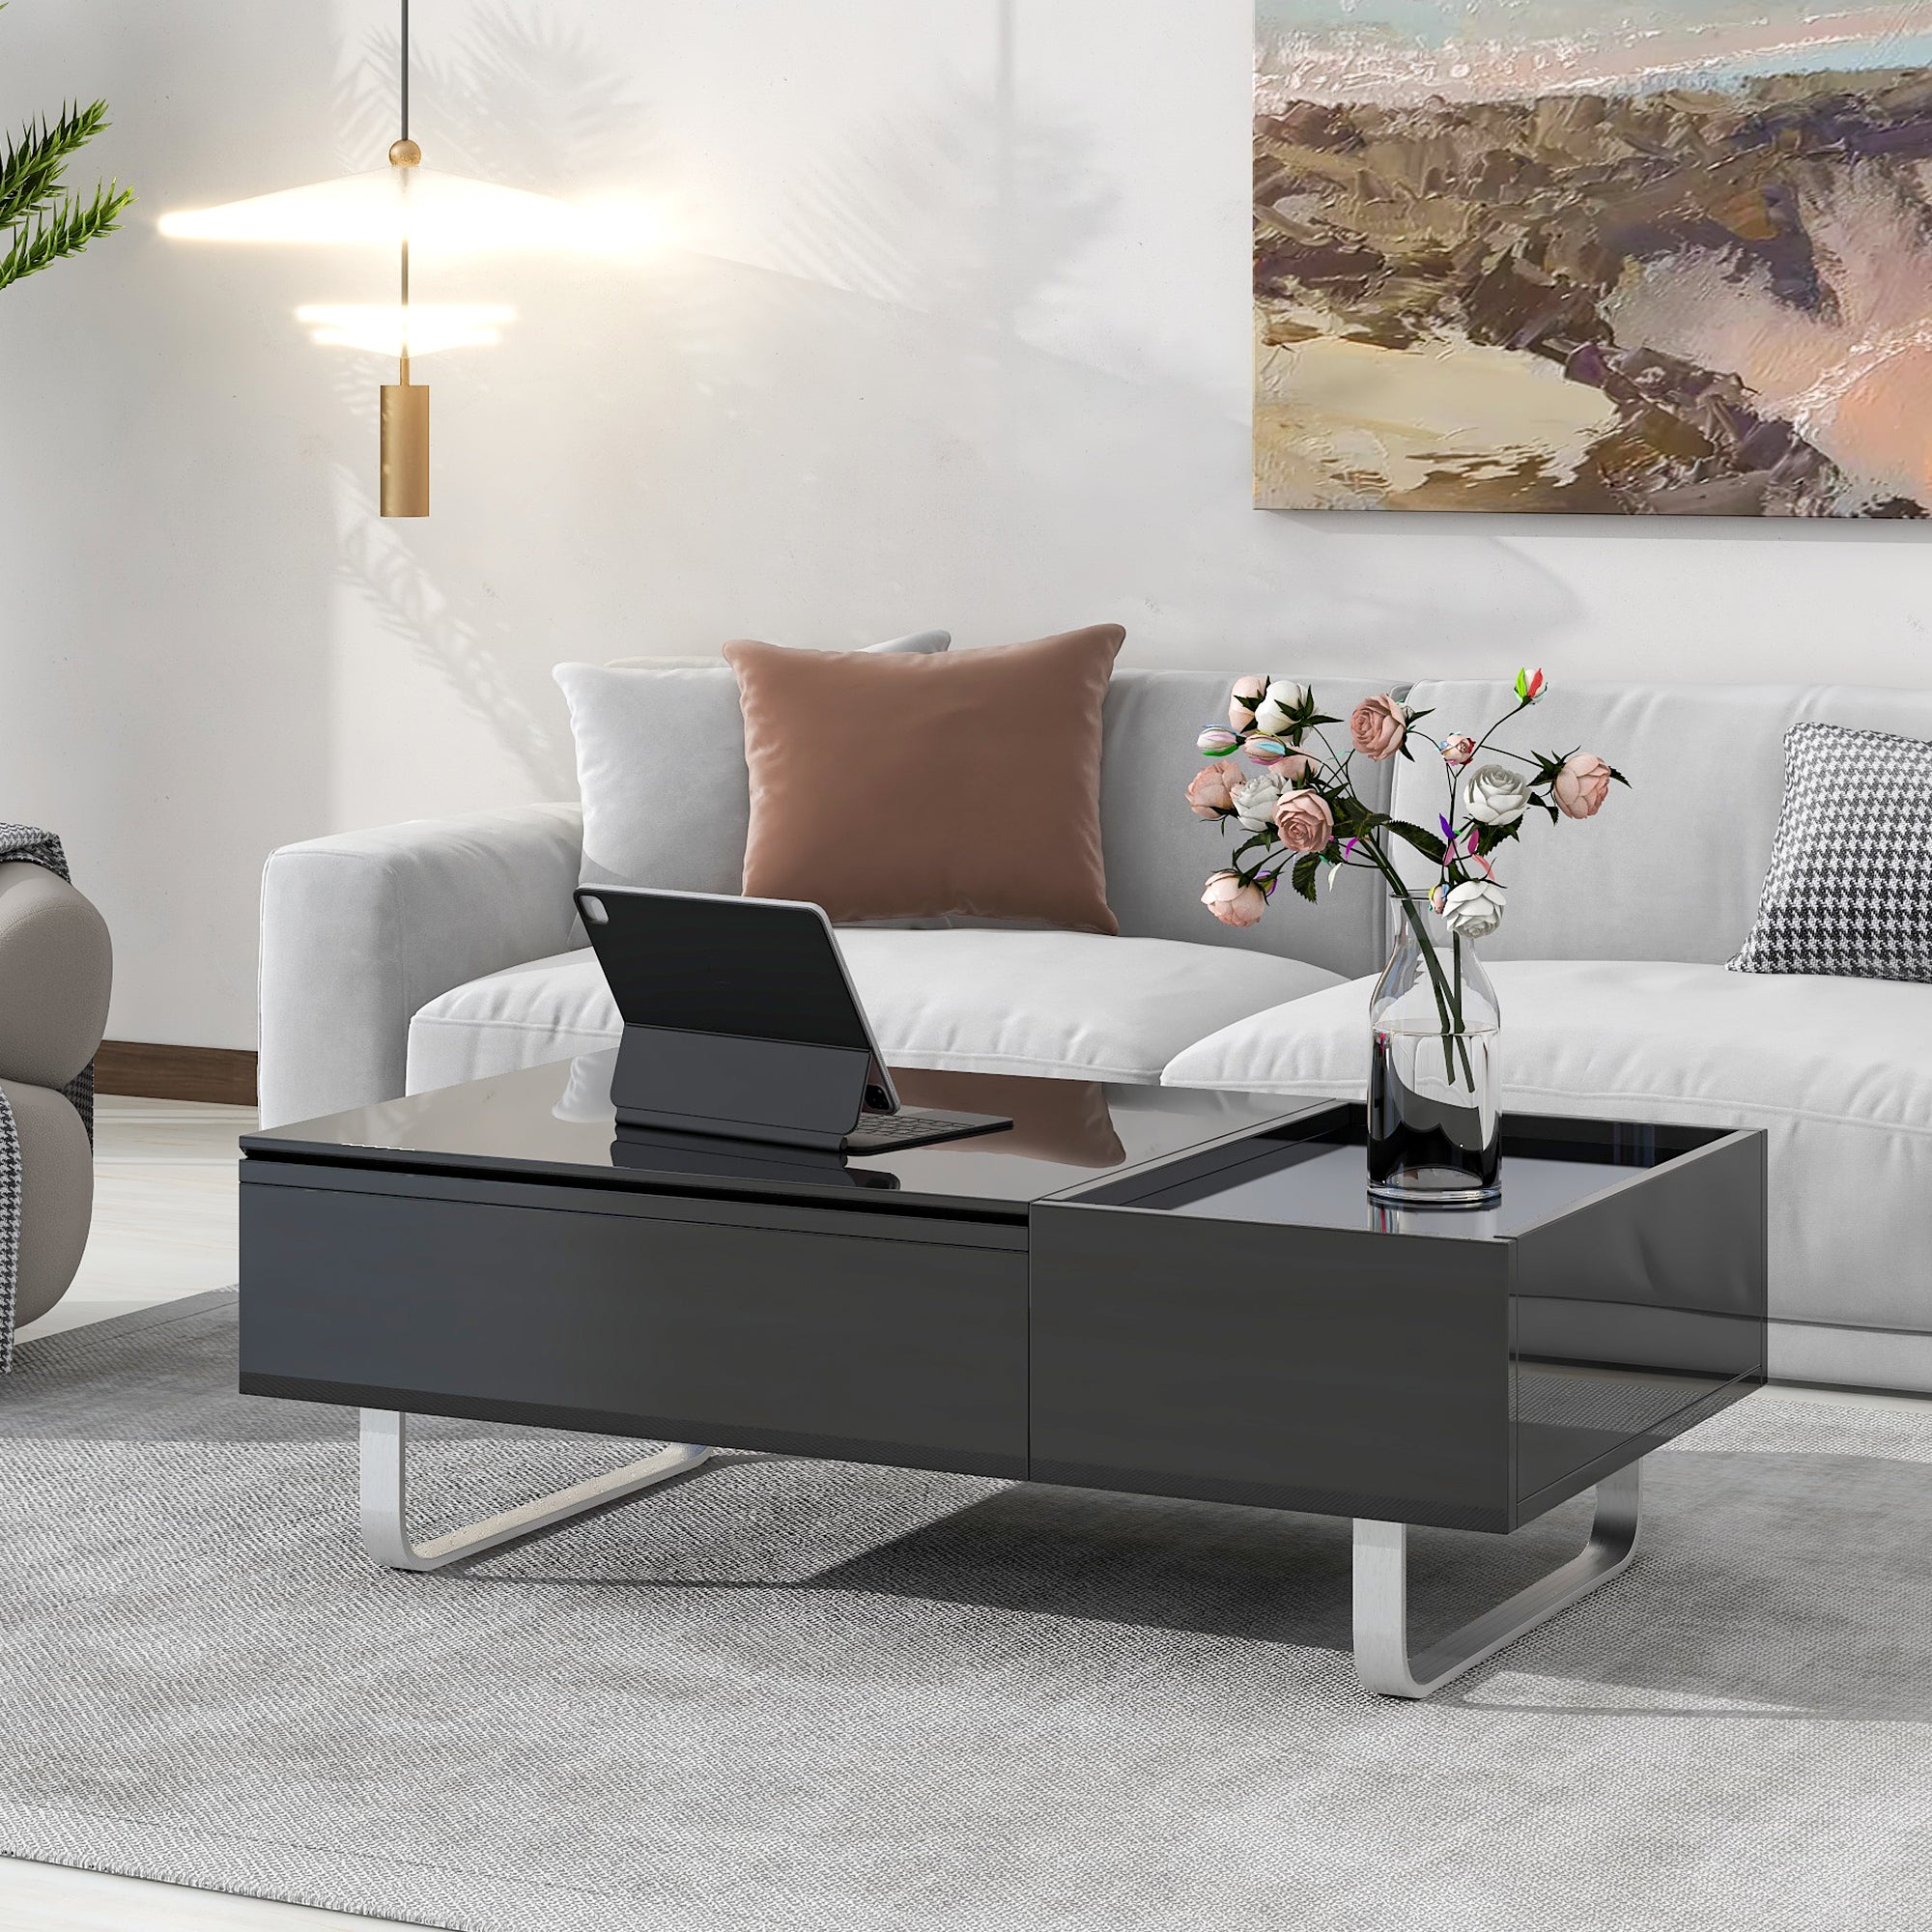 ON TREND Multi functional Coffee Table with Lifted